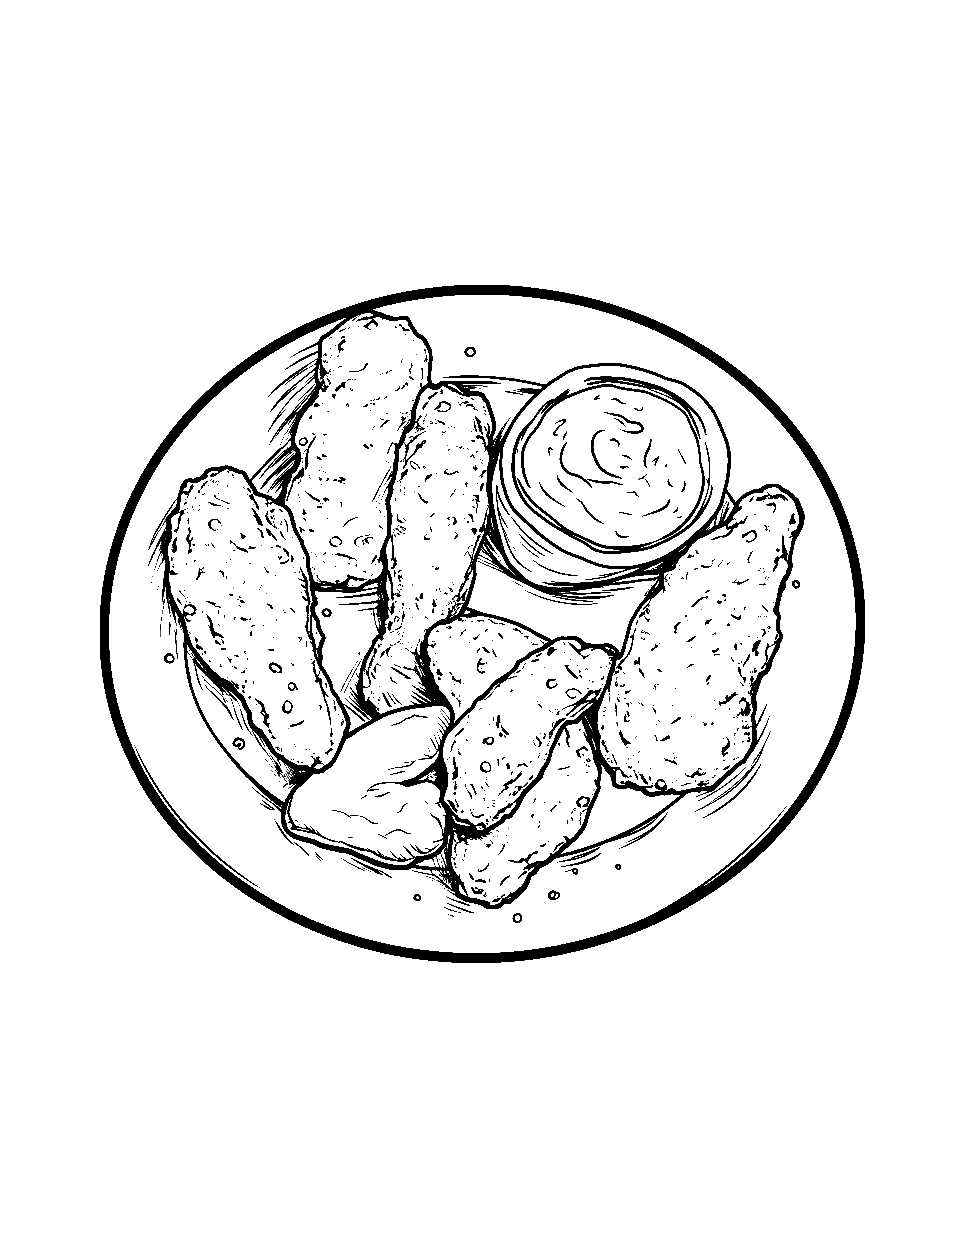 Chicken Wings Platter Food Coloring Page - Crispy chicken wings served with a dip on the side.